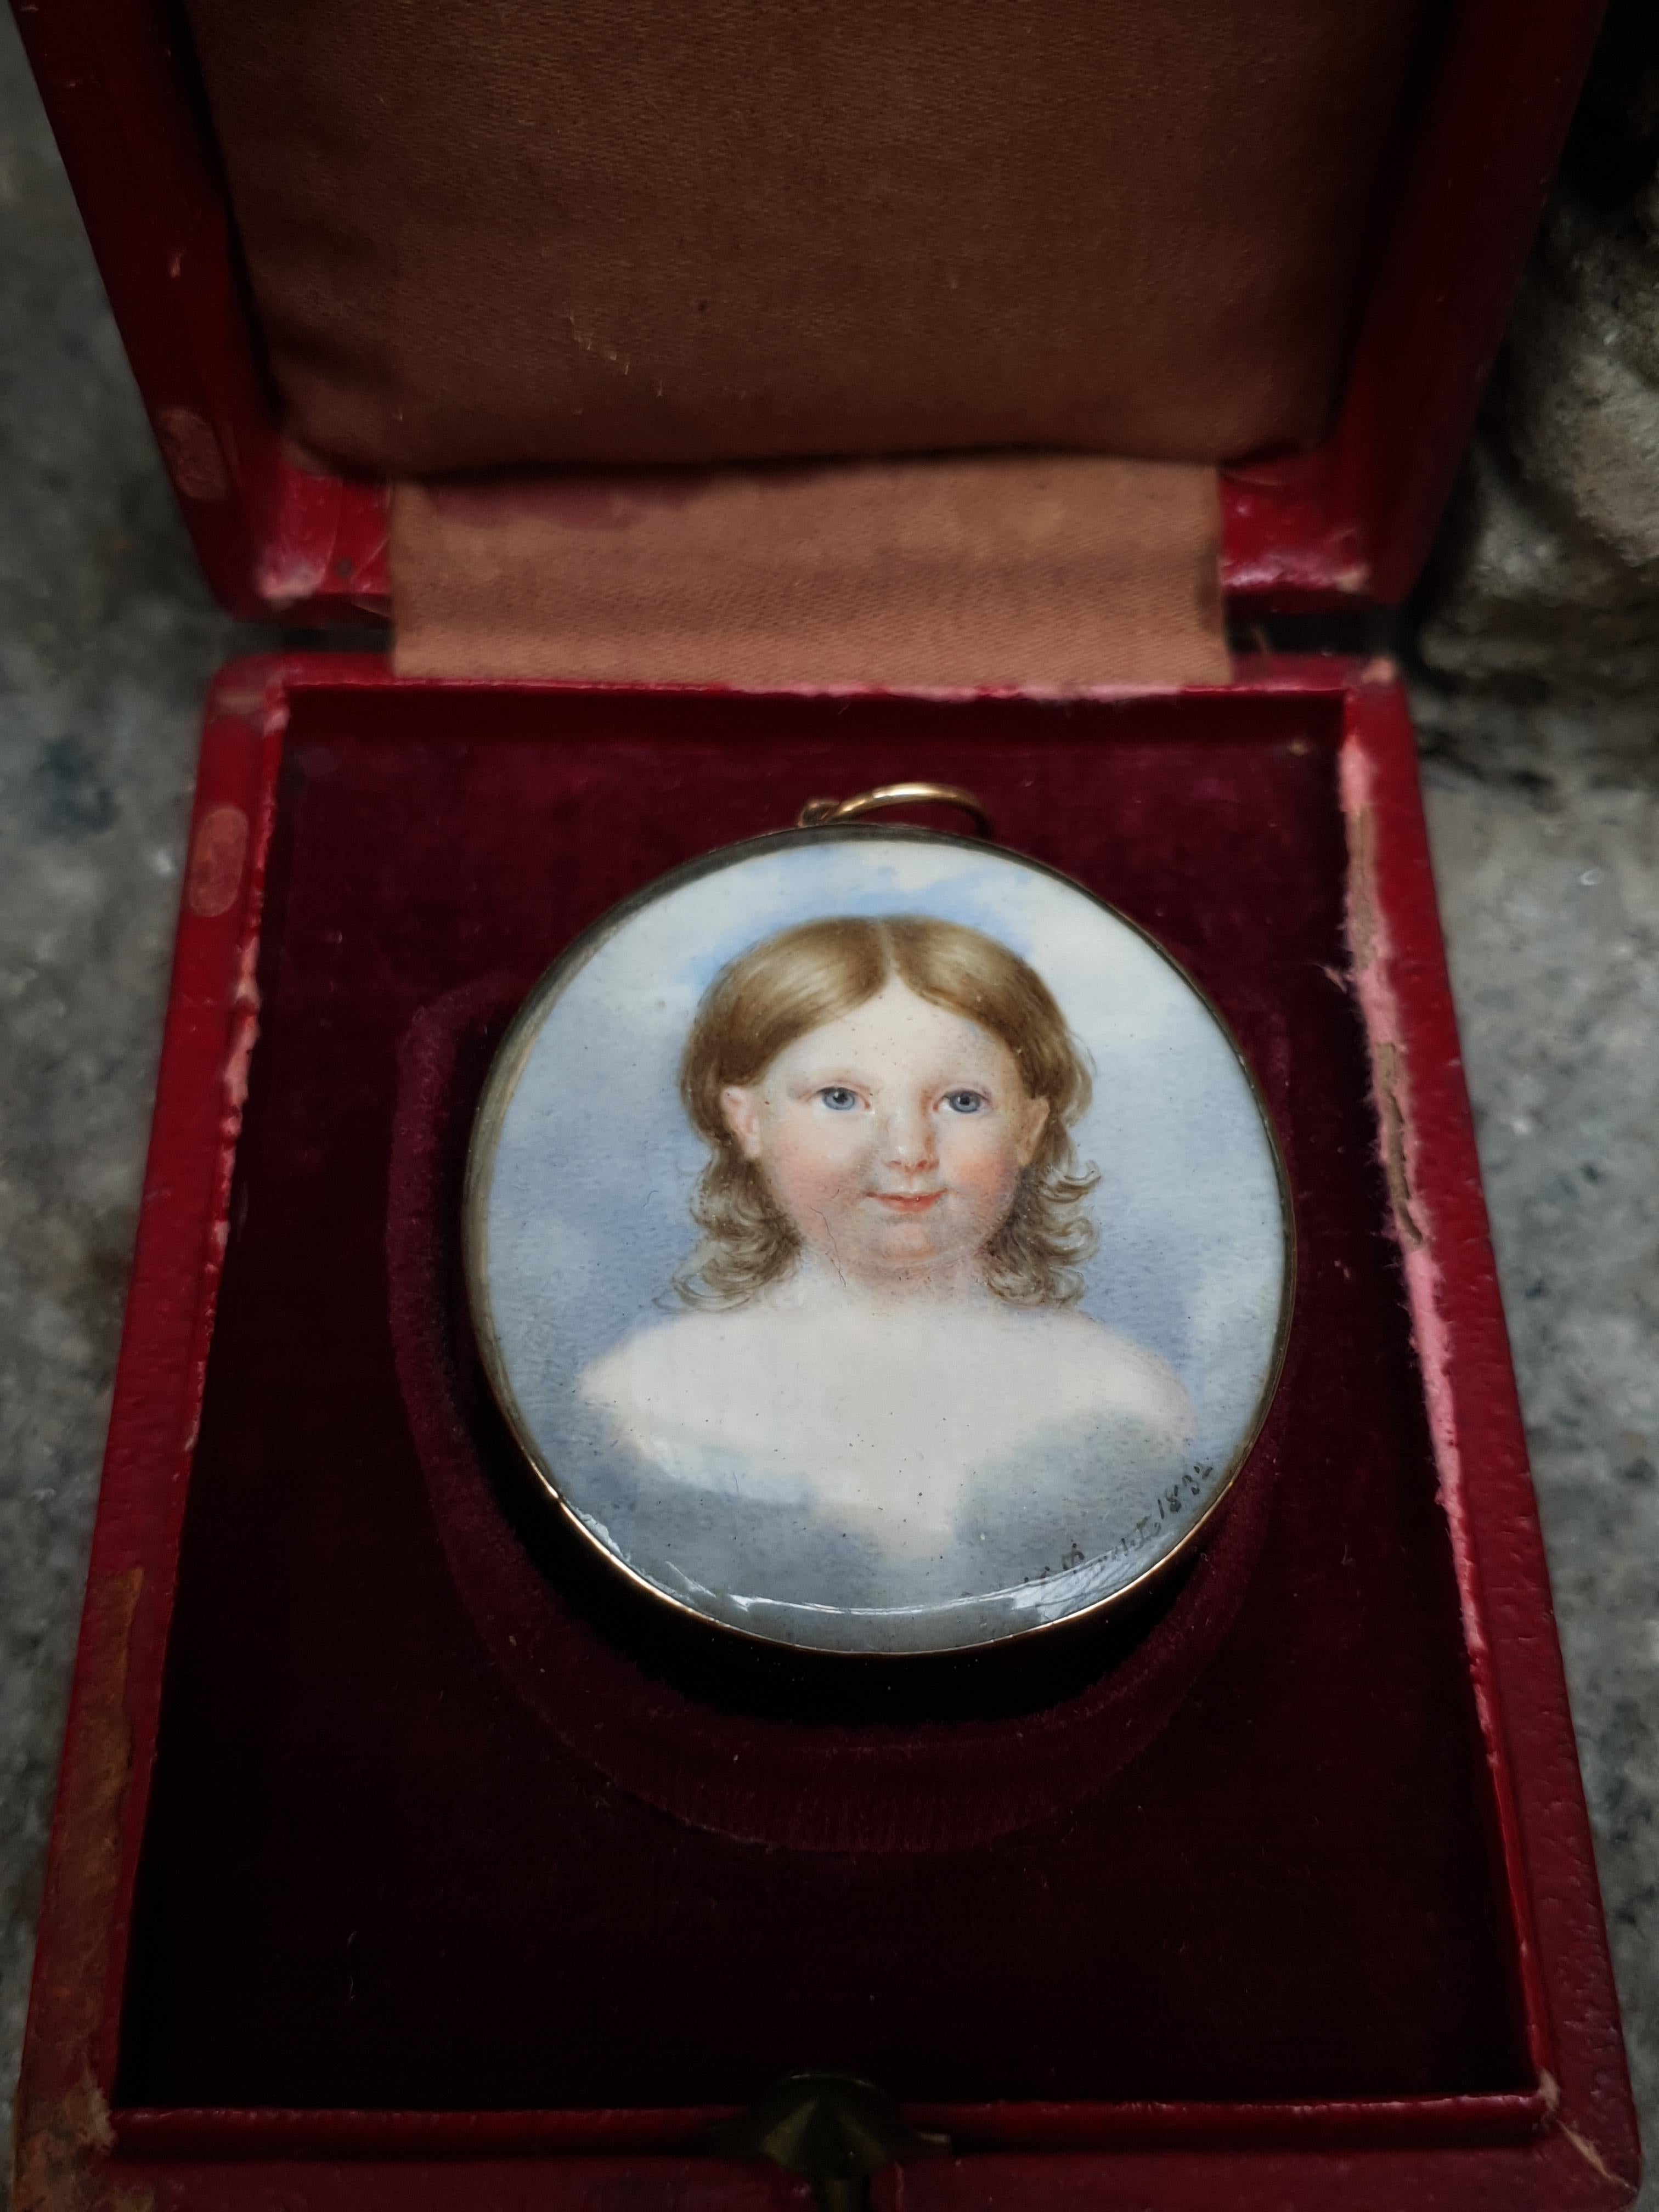 Very nice quality work this miniature portrait of a child. Signed by Joseph Parent 1832. The frame is 18 kt  gold.
Size:40mmx35mm . On the reverse side there is a hair piece presented.